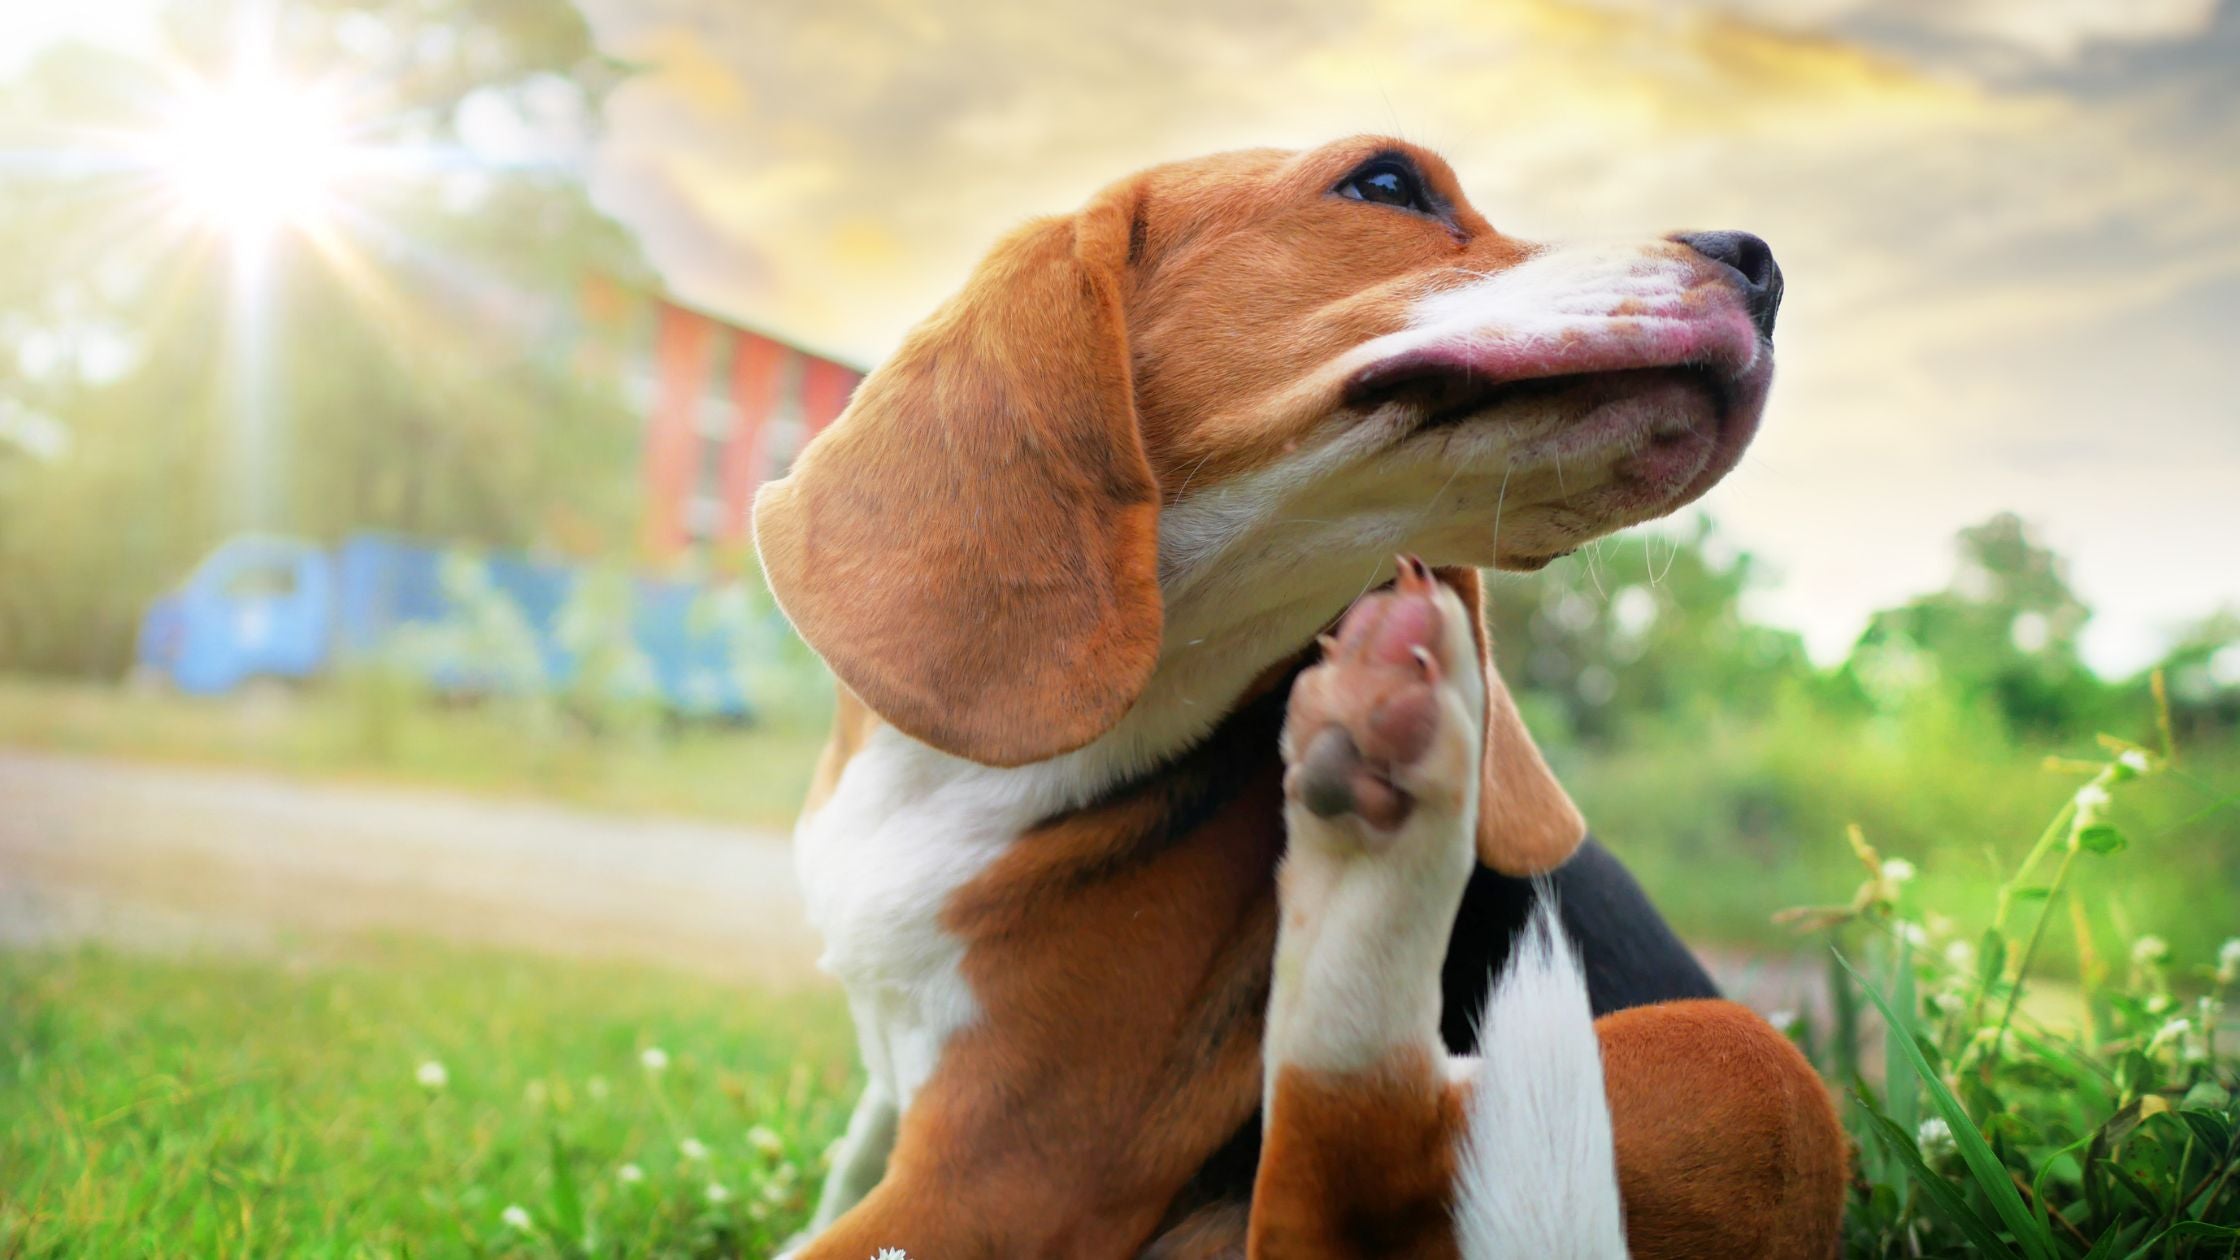 Itchy Pet Awareness Month: 3 Ways to Care For Your Companion’s Skin